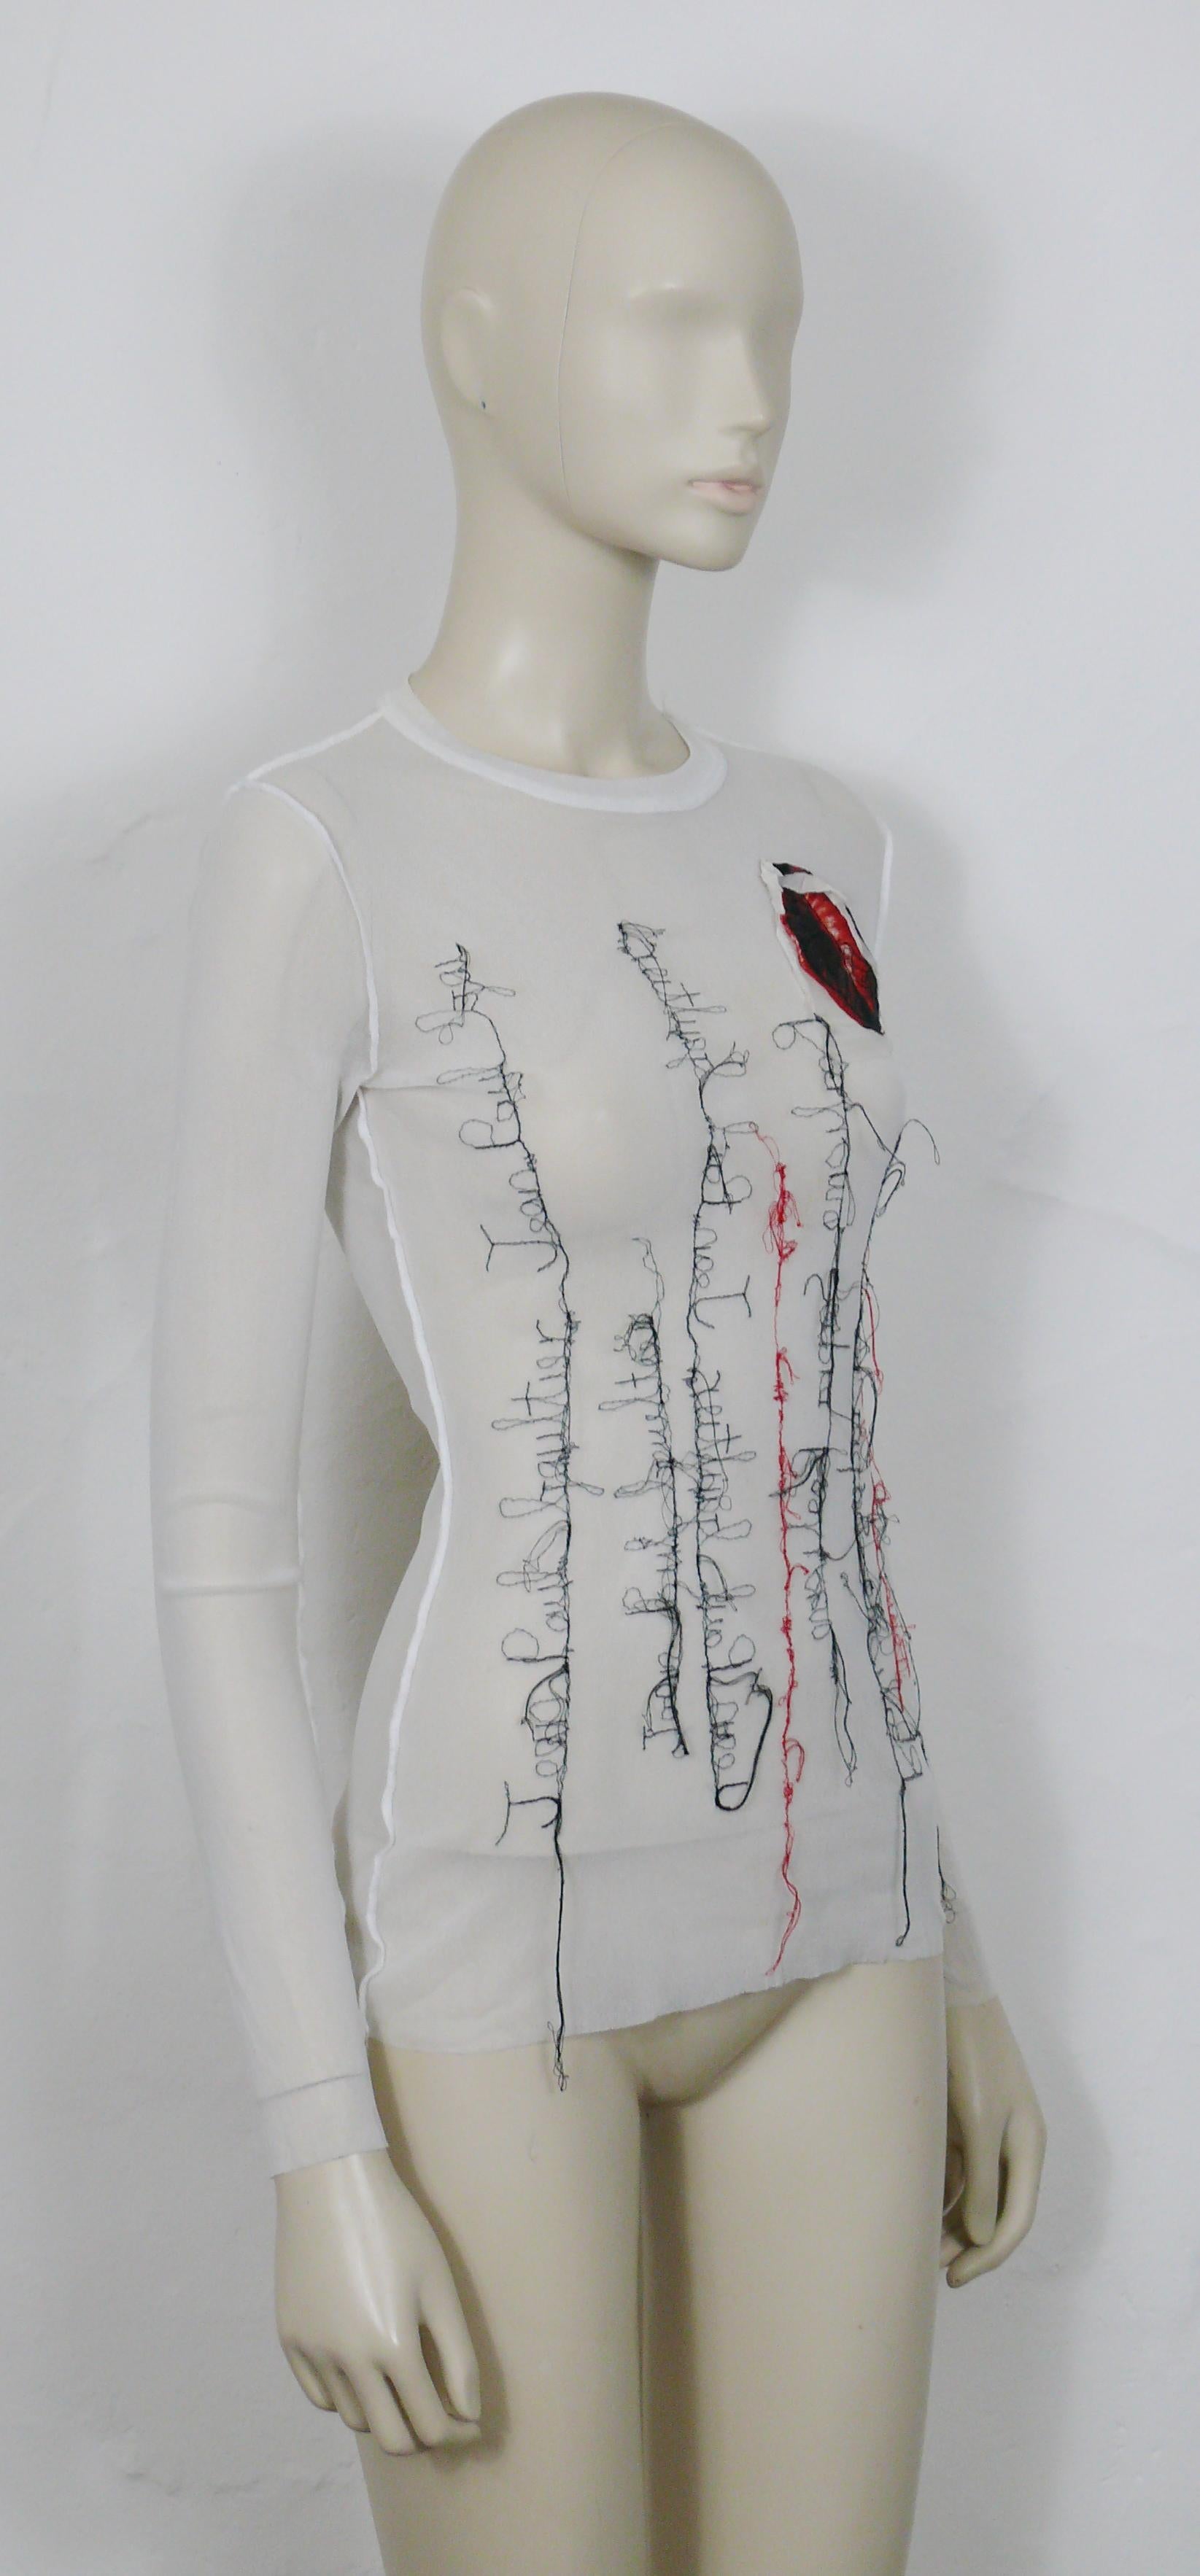 JEAN PAUL GAULTIER vintage white FUZZI sheer mesh top featuring a mouth applique and JEAN PAUL GAULTIER cursive signature embroideries.

Label reads JEAN PAUL GAULTIER Maille Femme.
Made in Italy.

Size label reads : L.
Please refer to